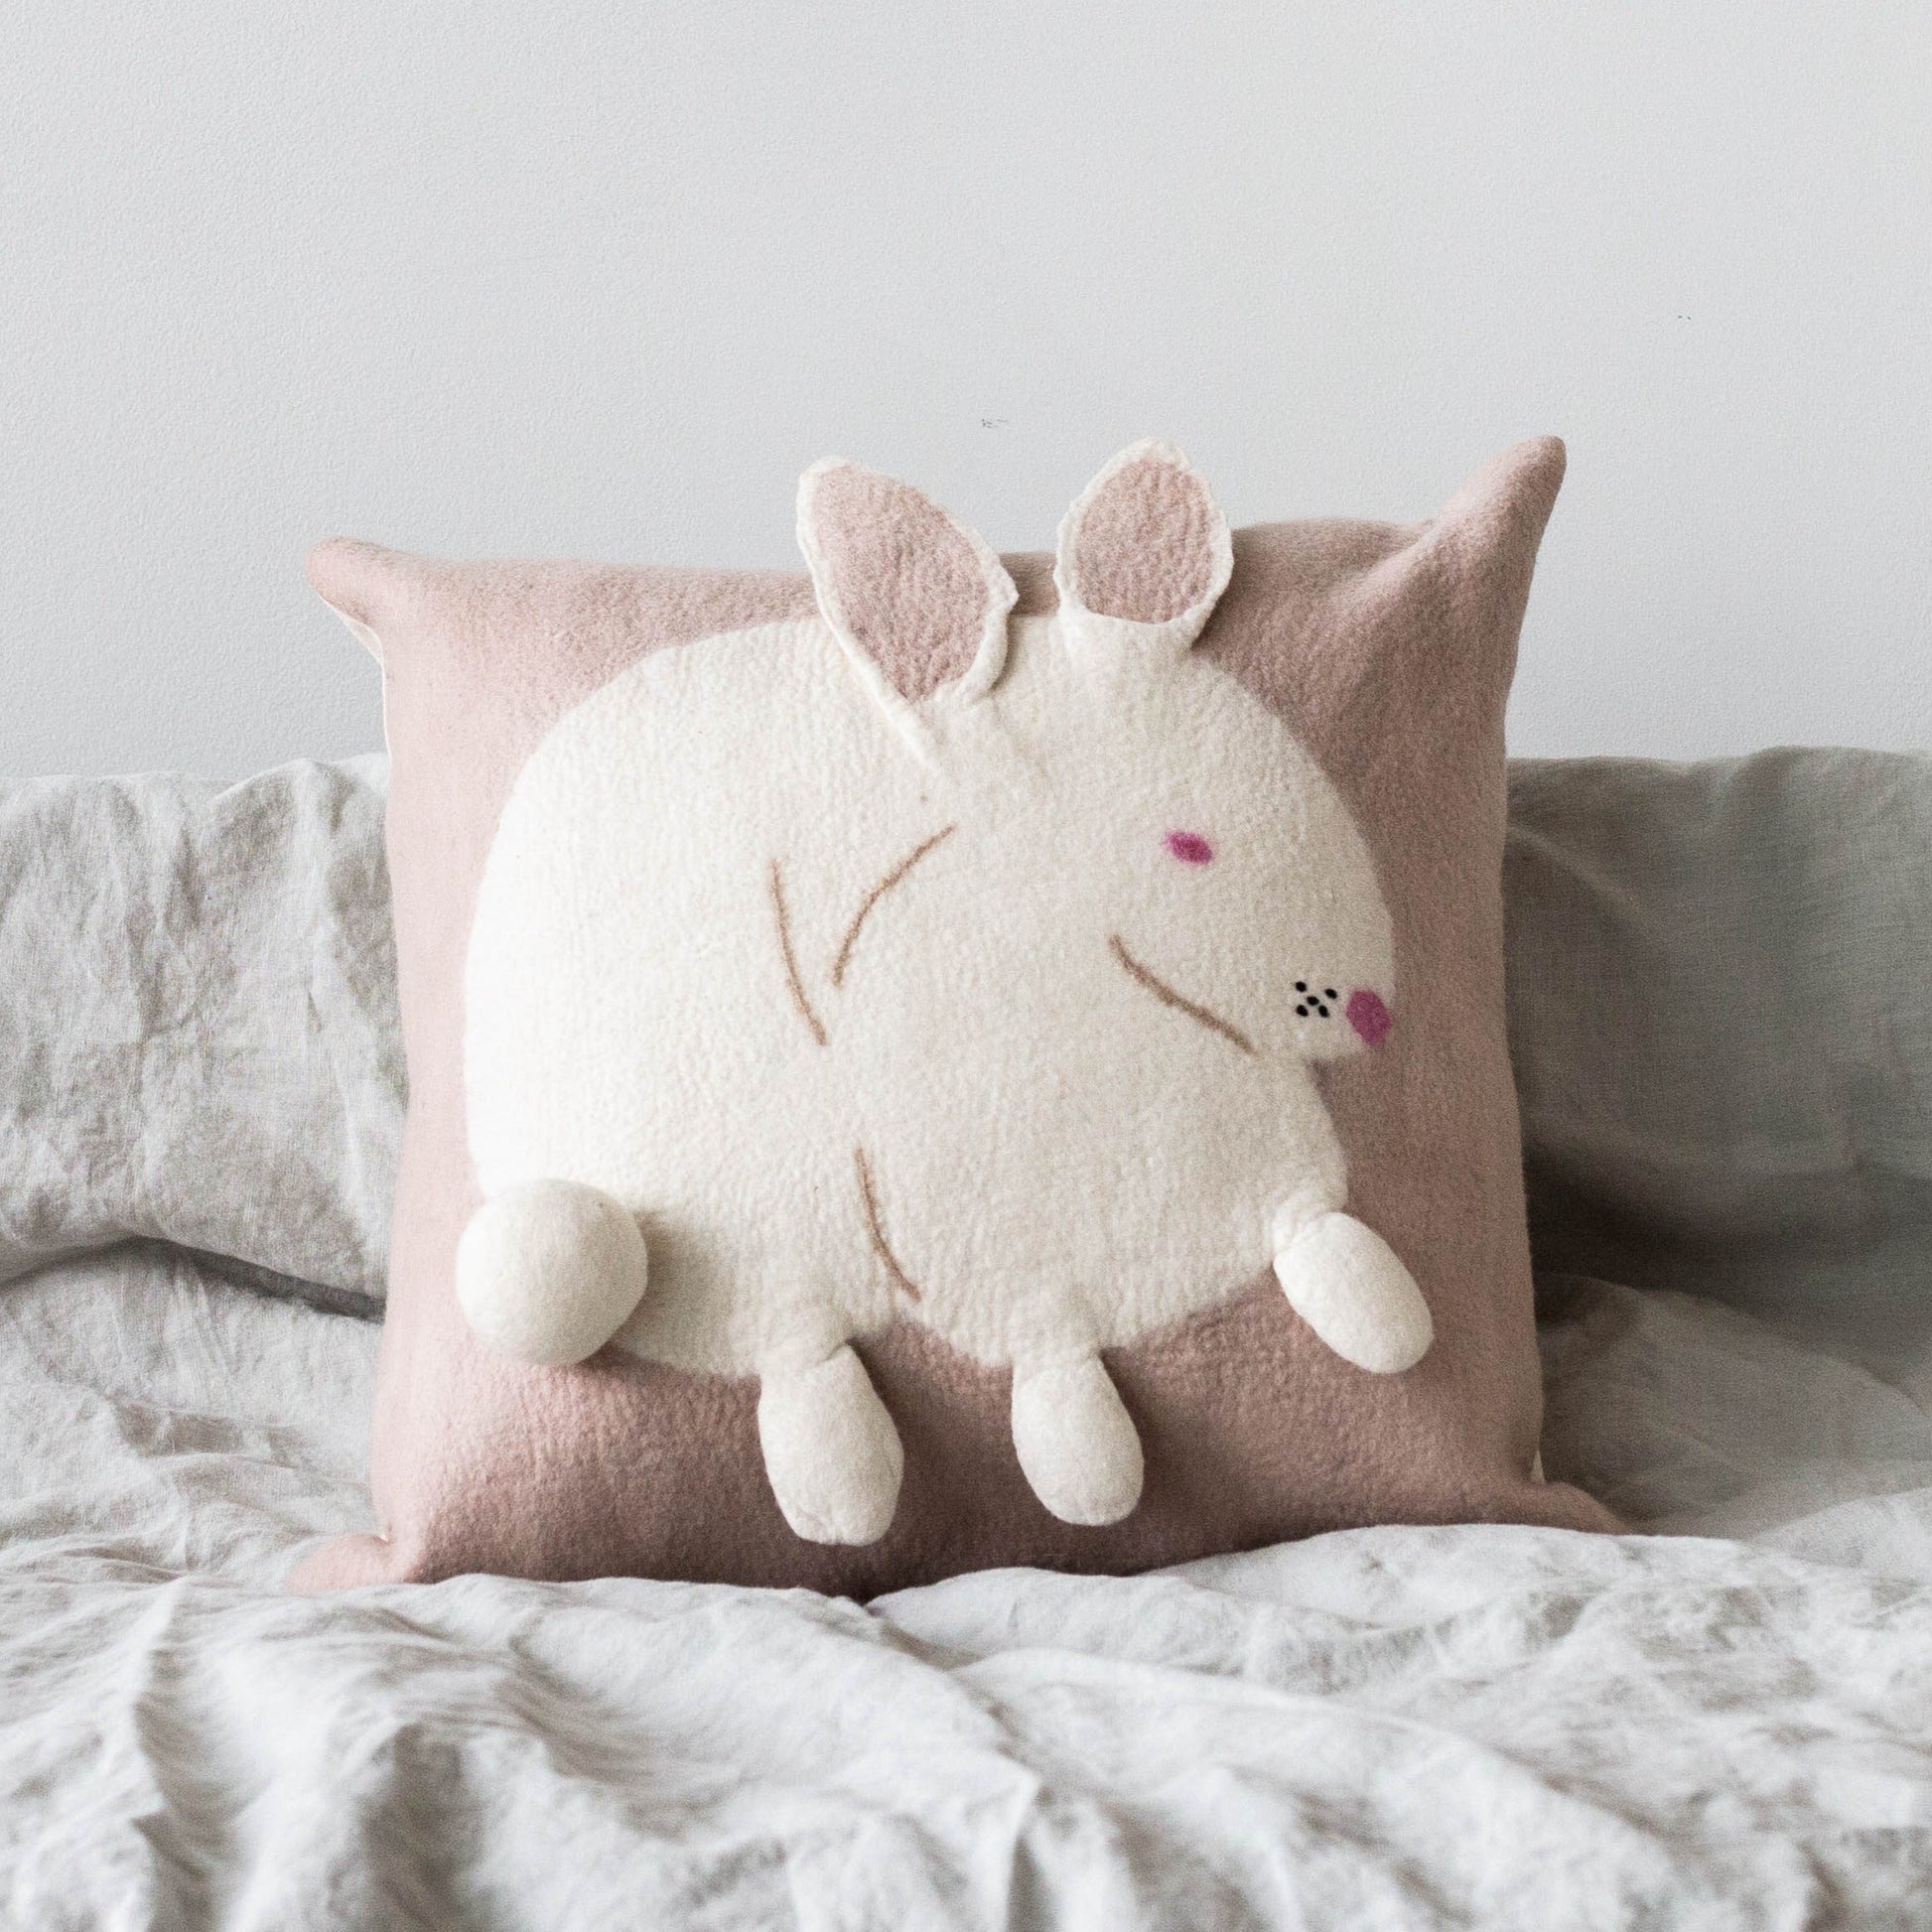 Bunny Throw Pillow Square 20"L x 20"H